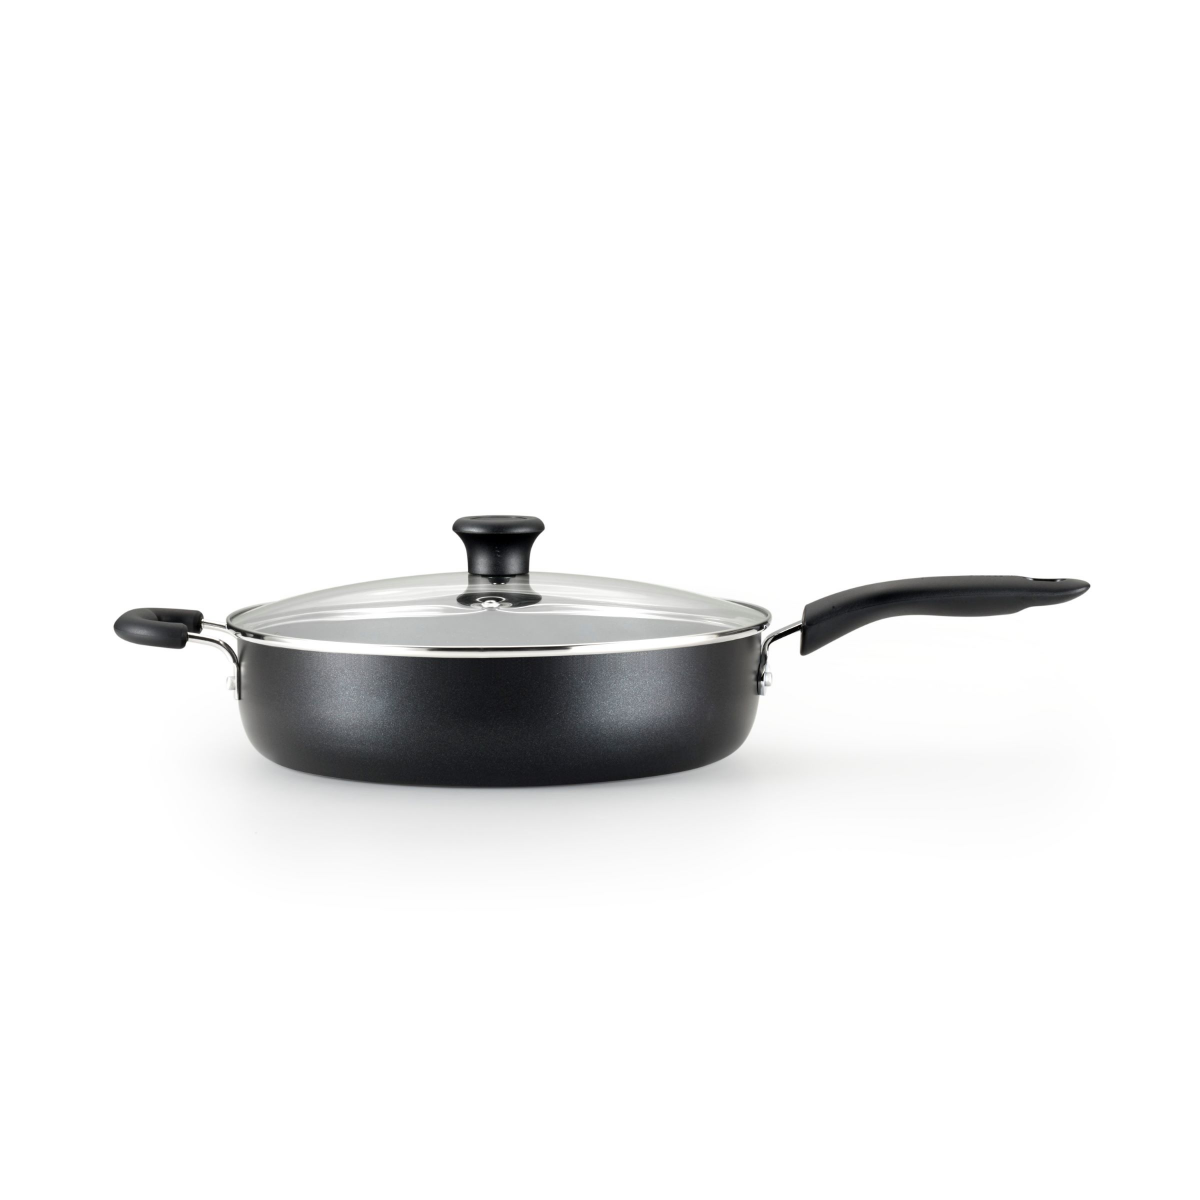 slide 5 of 5, T-fal Specialty Nonstick Jumbo Cooker Cookware with Glass Lid, Black, 5 qt